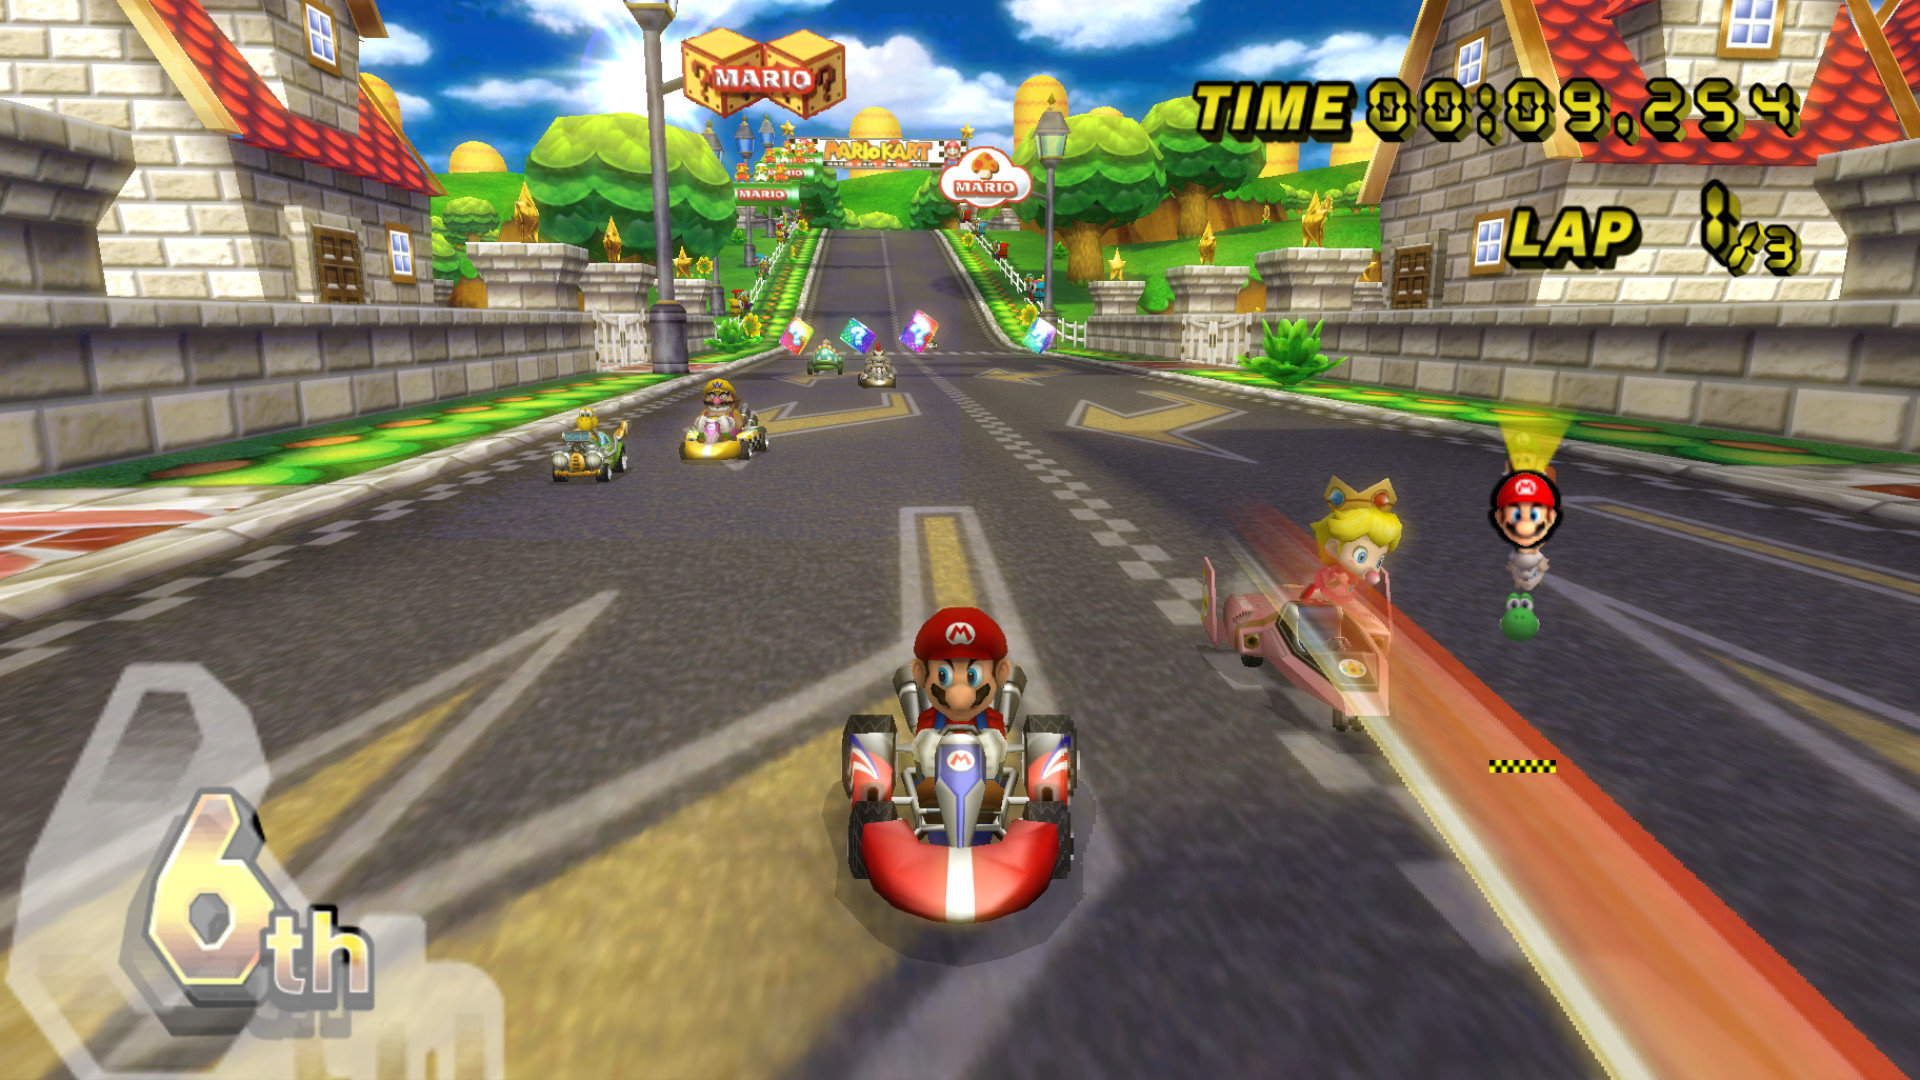 Download hd 1920x1080 Mario Kart Wii PC background ID:324478 for free